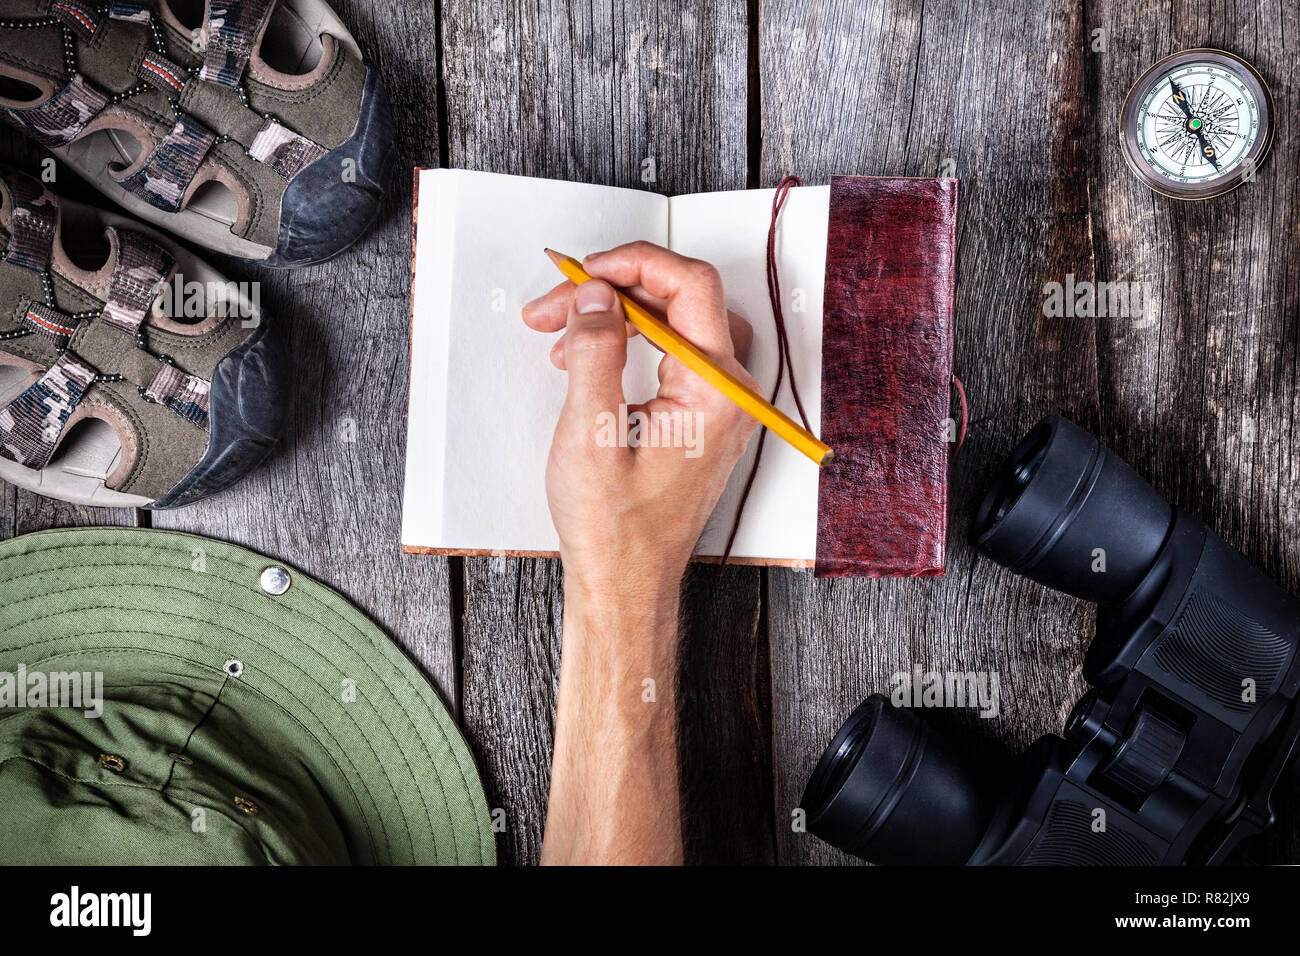 Man writing in the notebook on the wooden table with traveler outfit Stock Photo